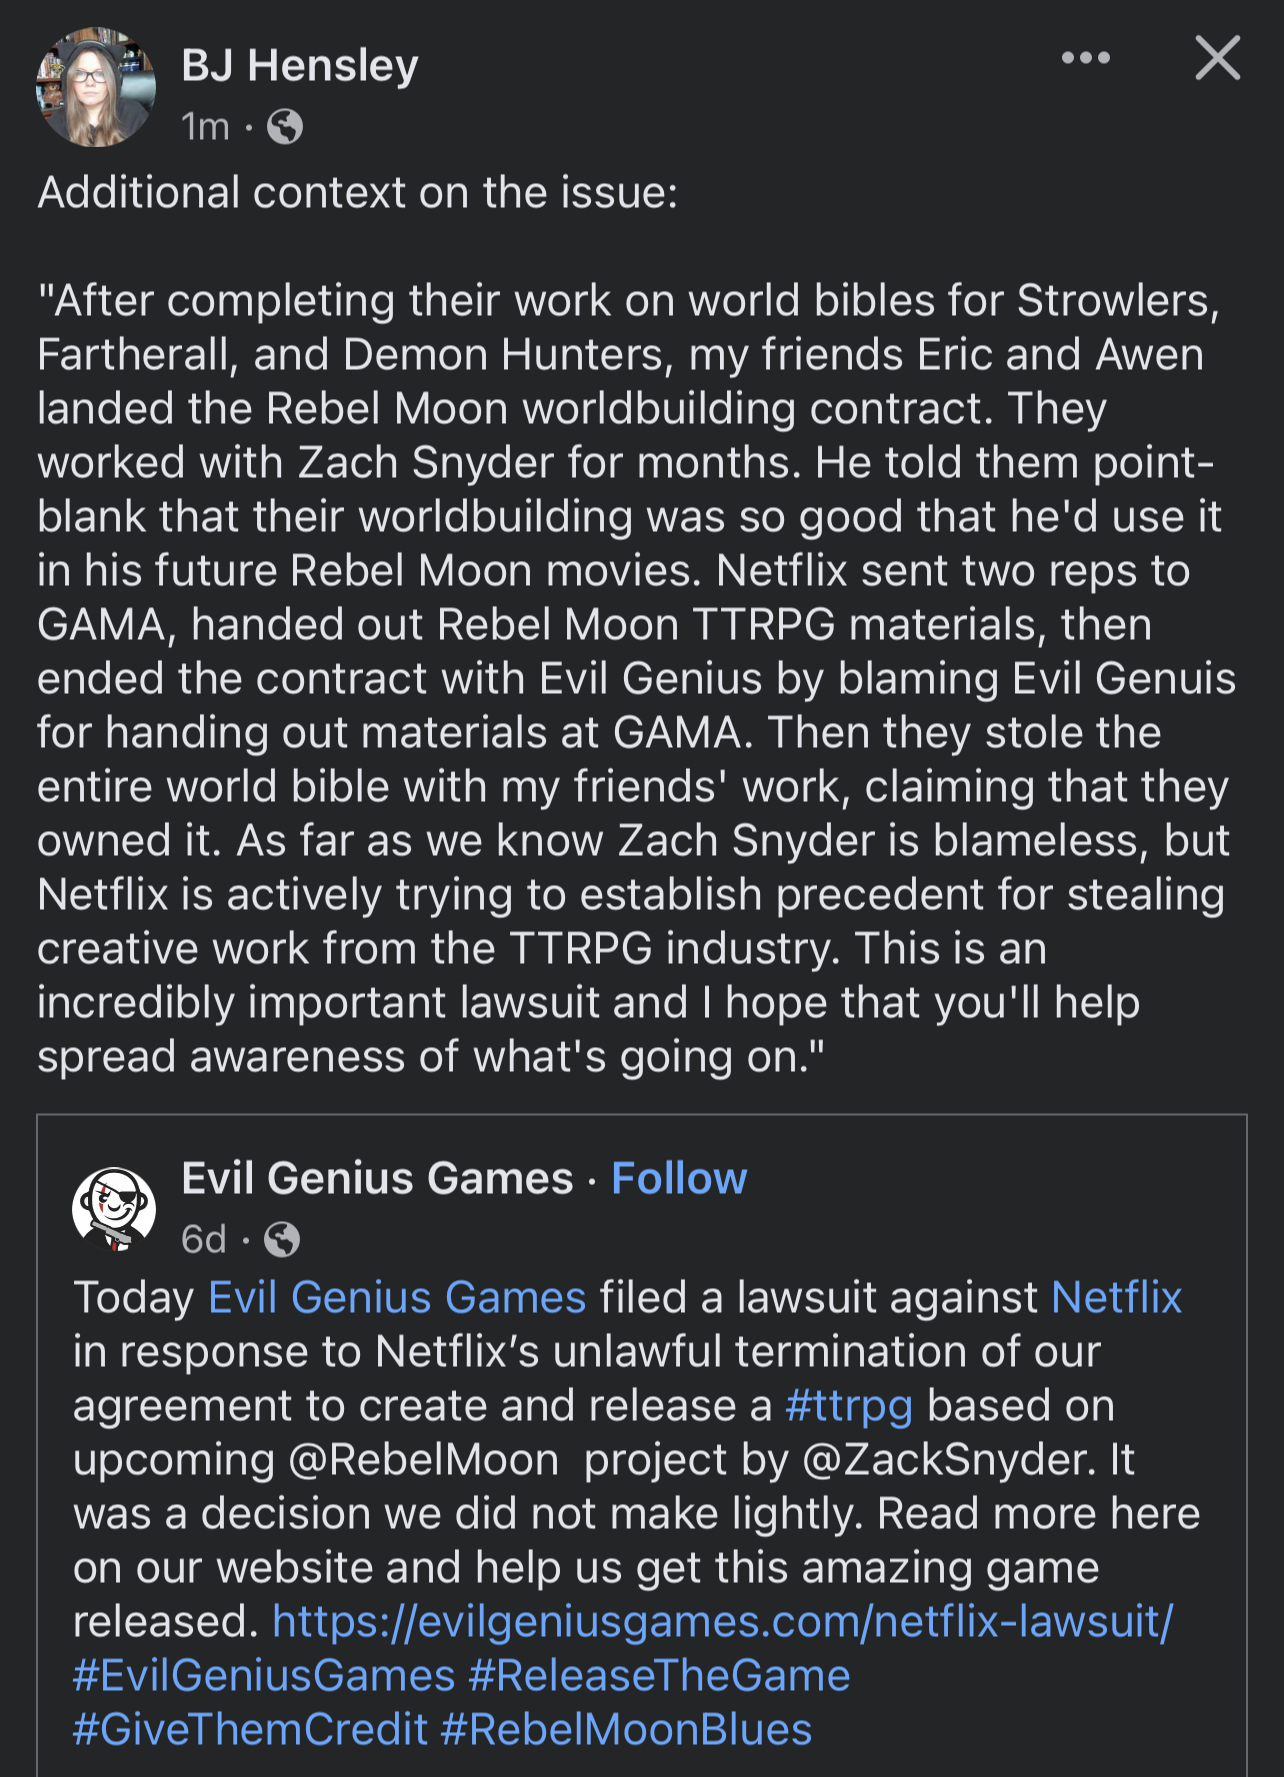 Additional context on the issue:   After completing their work on world bibles for Strowlers, Fartherall, and Demon Hunters, my friends Eric and Awen landed the Rebel Moon worldbuilding contract. They worked with Zach Snyder for months. He told them point-blank that their worldbuilding was so good that he'd use it in his future Rebel Moon movies. Netflix sent two reps to GAMA, handed out Rebel Moon TTRPG materials, then ended the contract with Evil Genius by blaming Evil Genuis for handing out materials at GAMA. Then they stole the entire world bible with my friends' work, claiming that they owned it. As far as we know Zach Snyder is blameless, but Netflix is actively trying to establish precedent for stealing creative work from the TTRPG industry. This is an incredibly important lawsuit and I hope that you'll help spread awareness of what's going on.